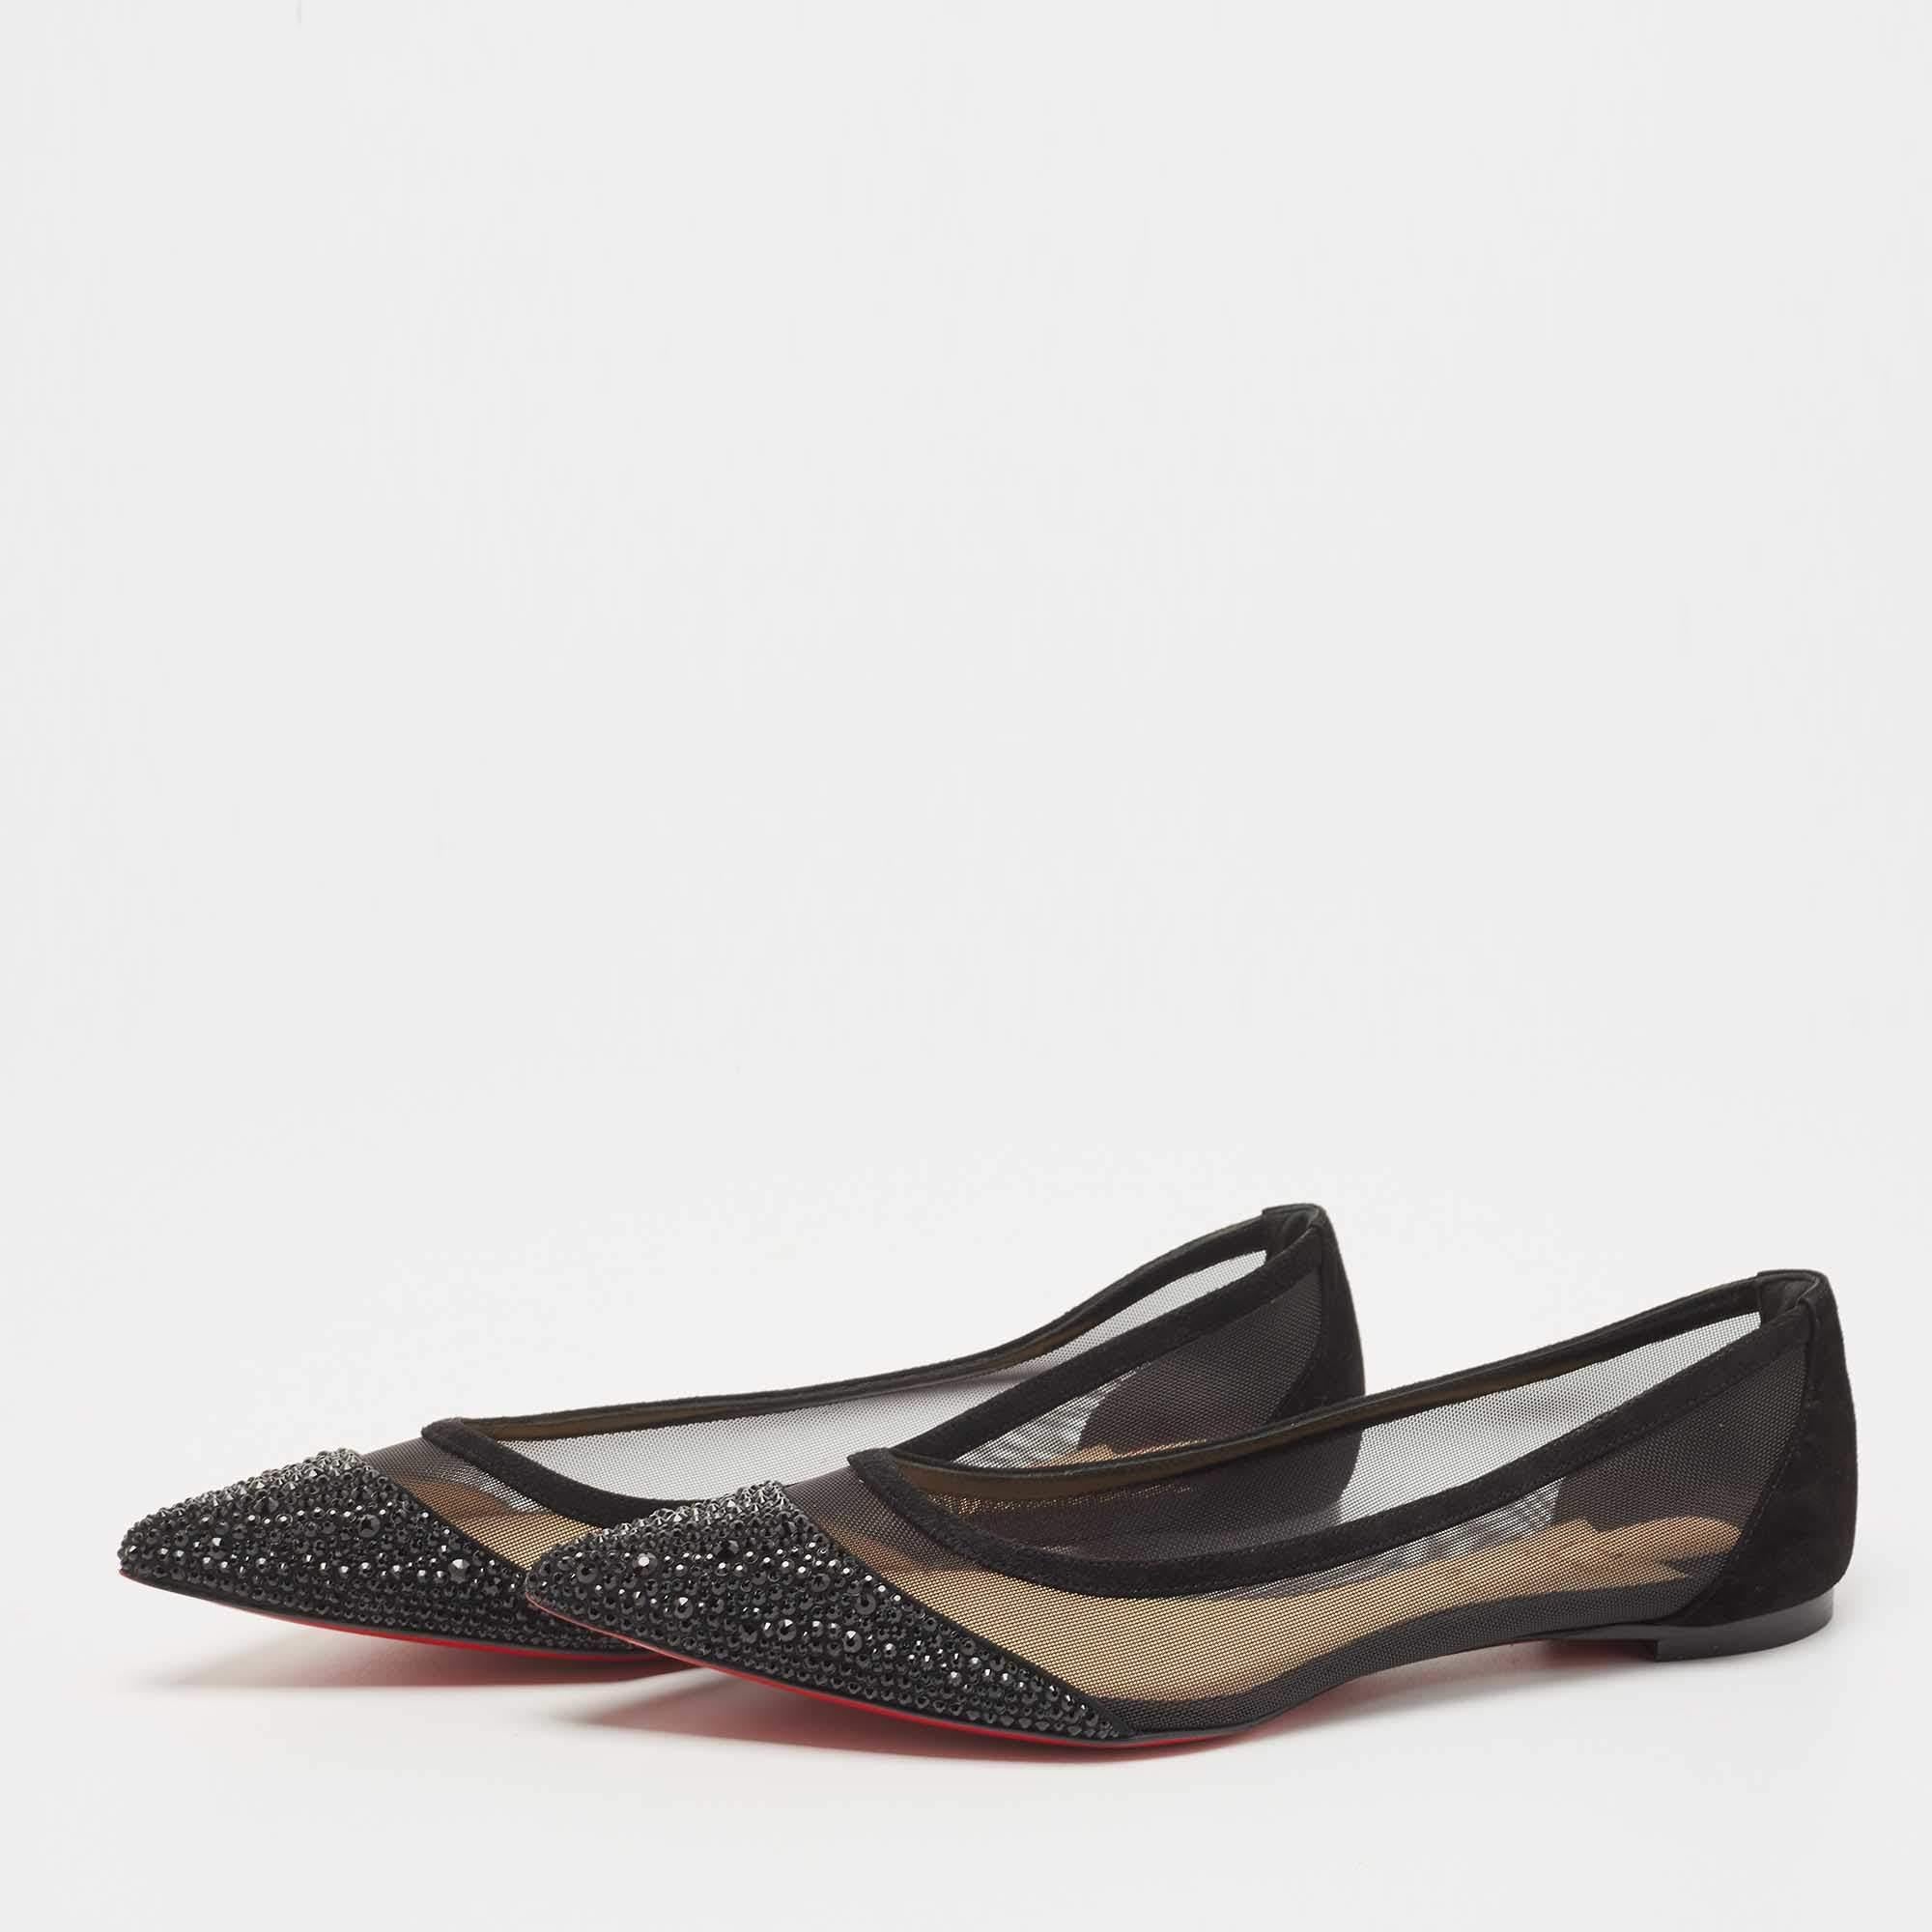 Complete your look by adding these designer ballet flats to your lovely wardrobe. They are crafted skilfully to grant the perfect fit and style.

Includes: Original Dustbag